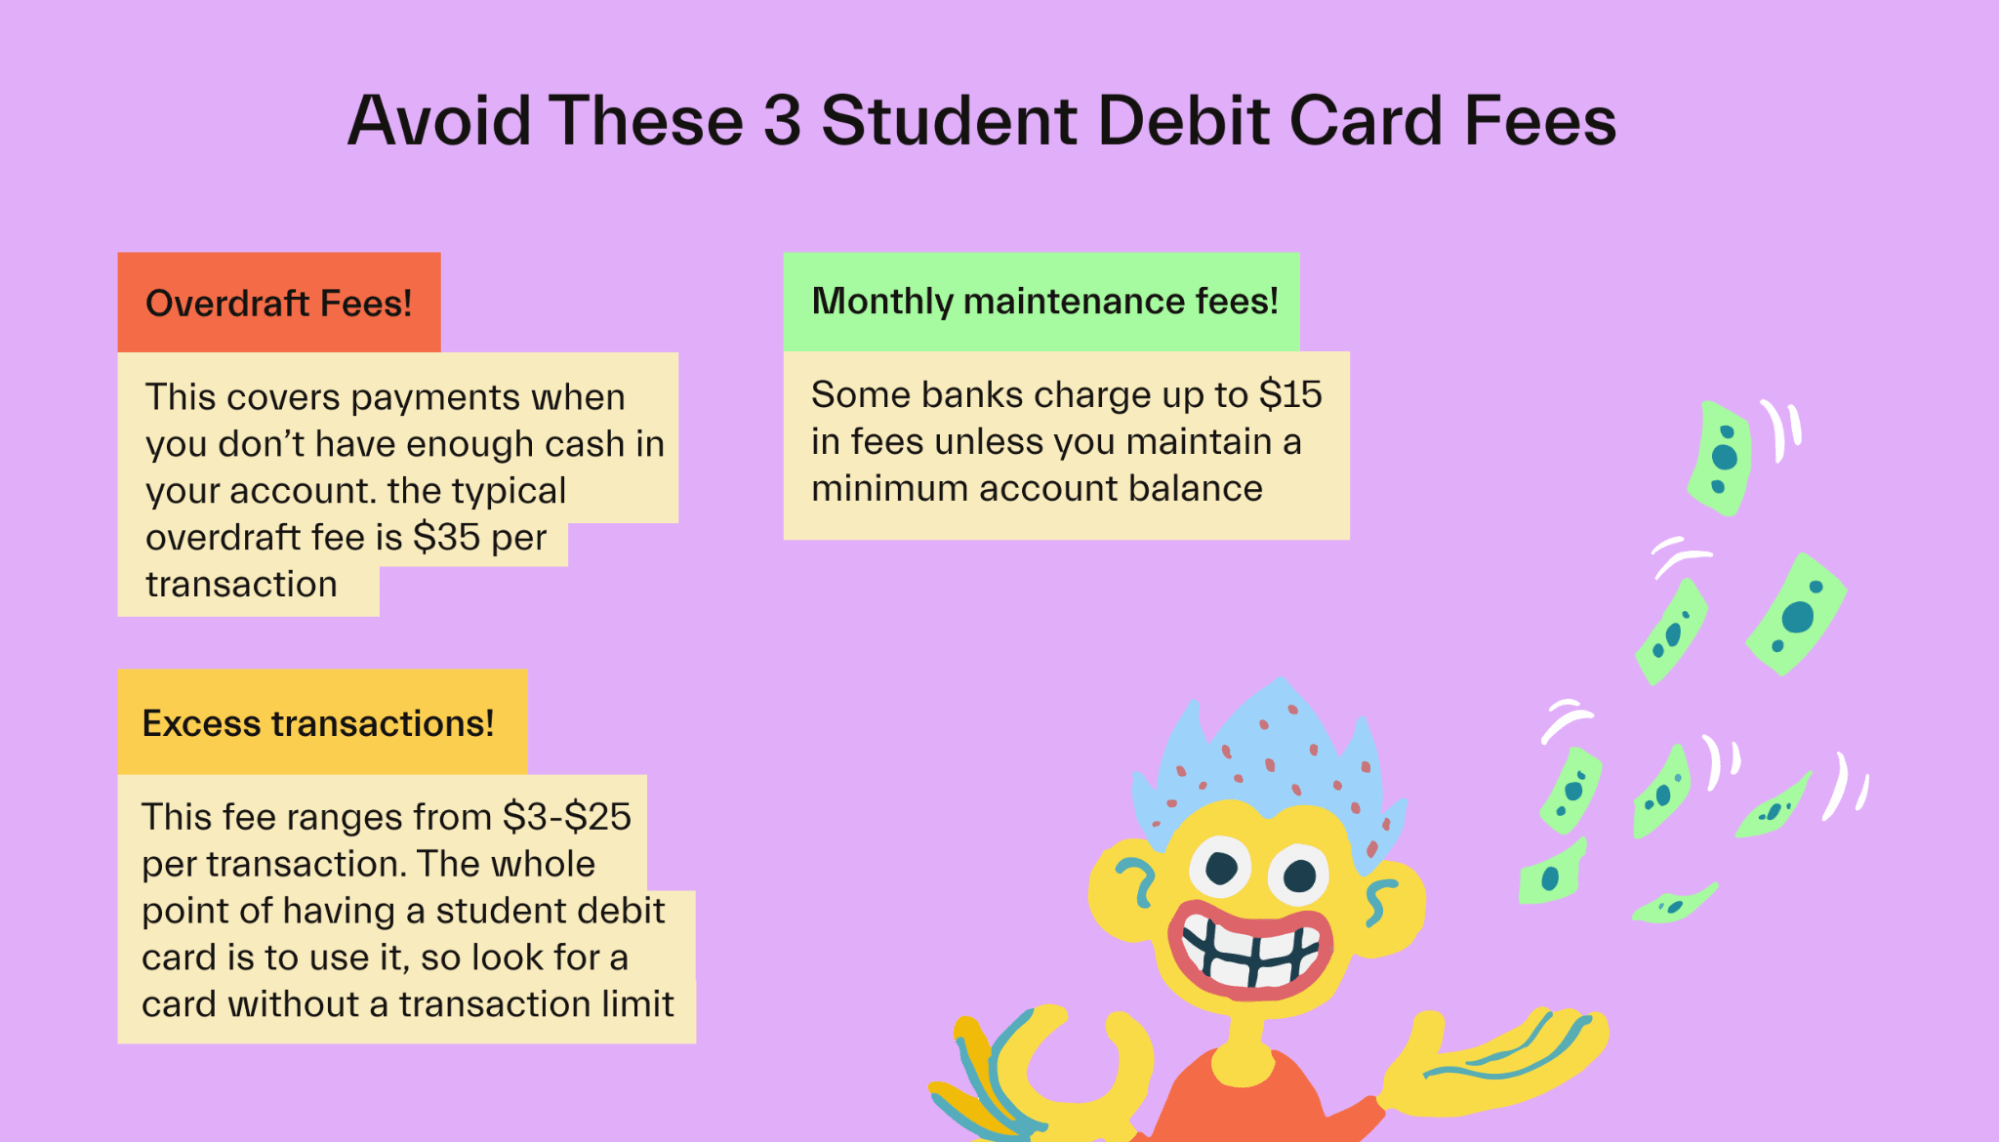 Avoid These 3 Student Debit Card Fees